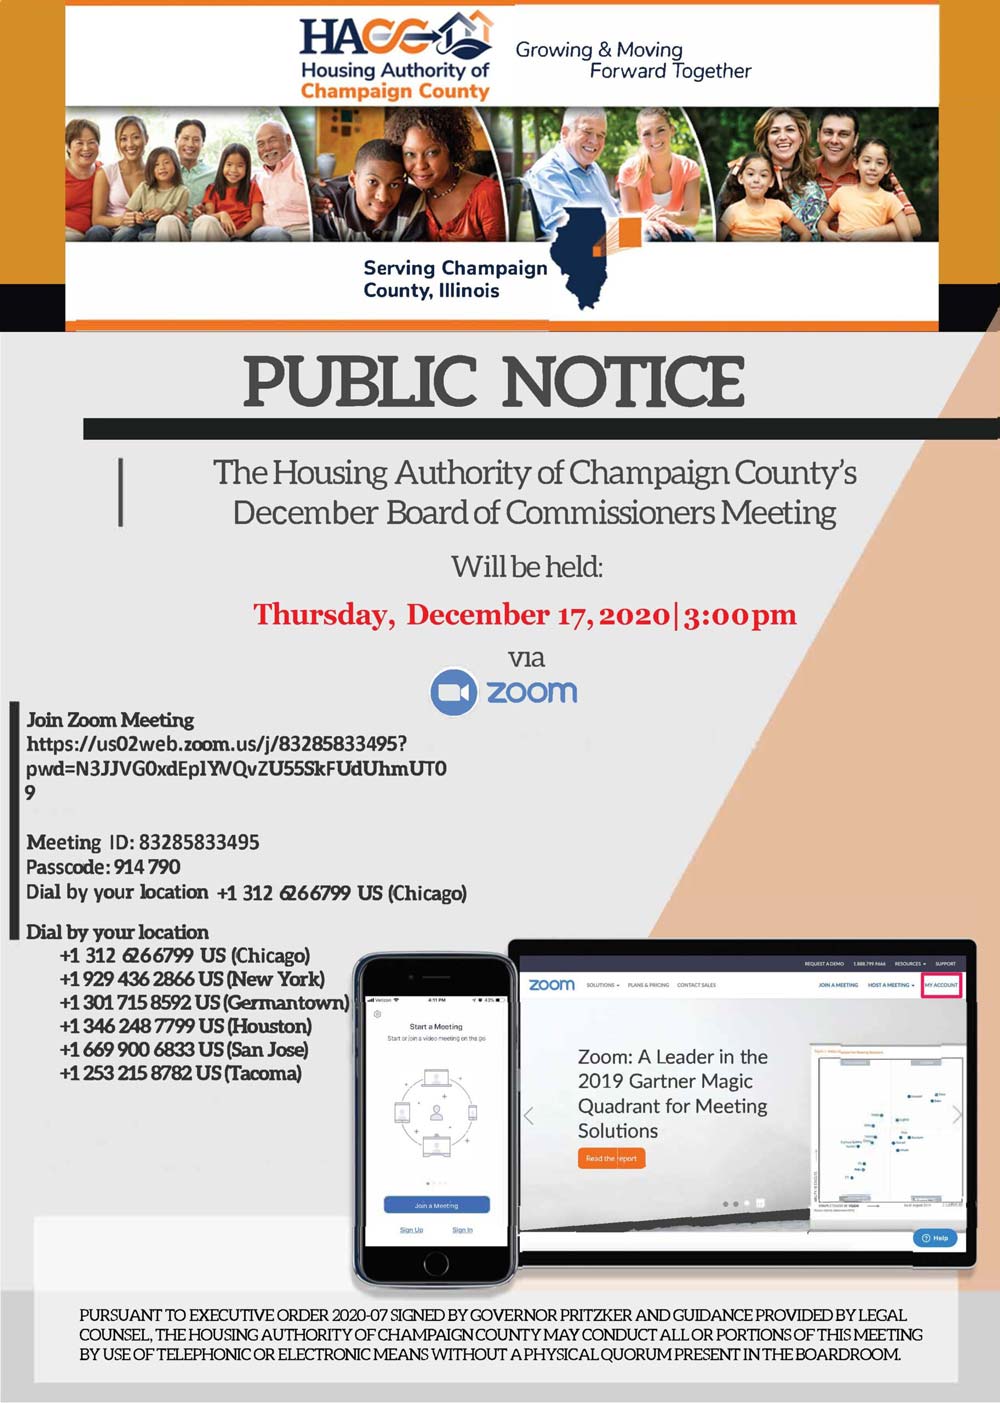 December Board of Commissioners Meeting flyer, all information as listed below.